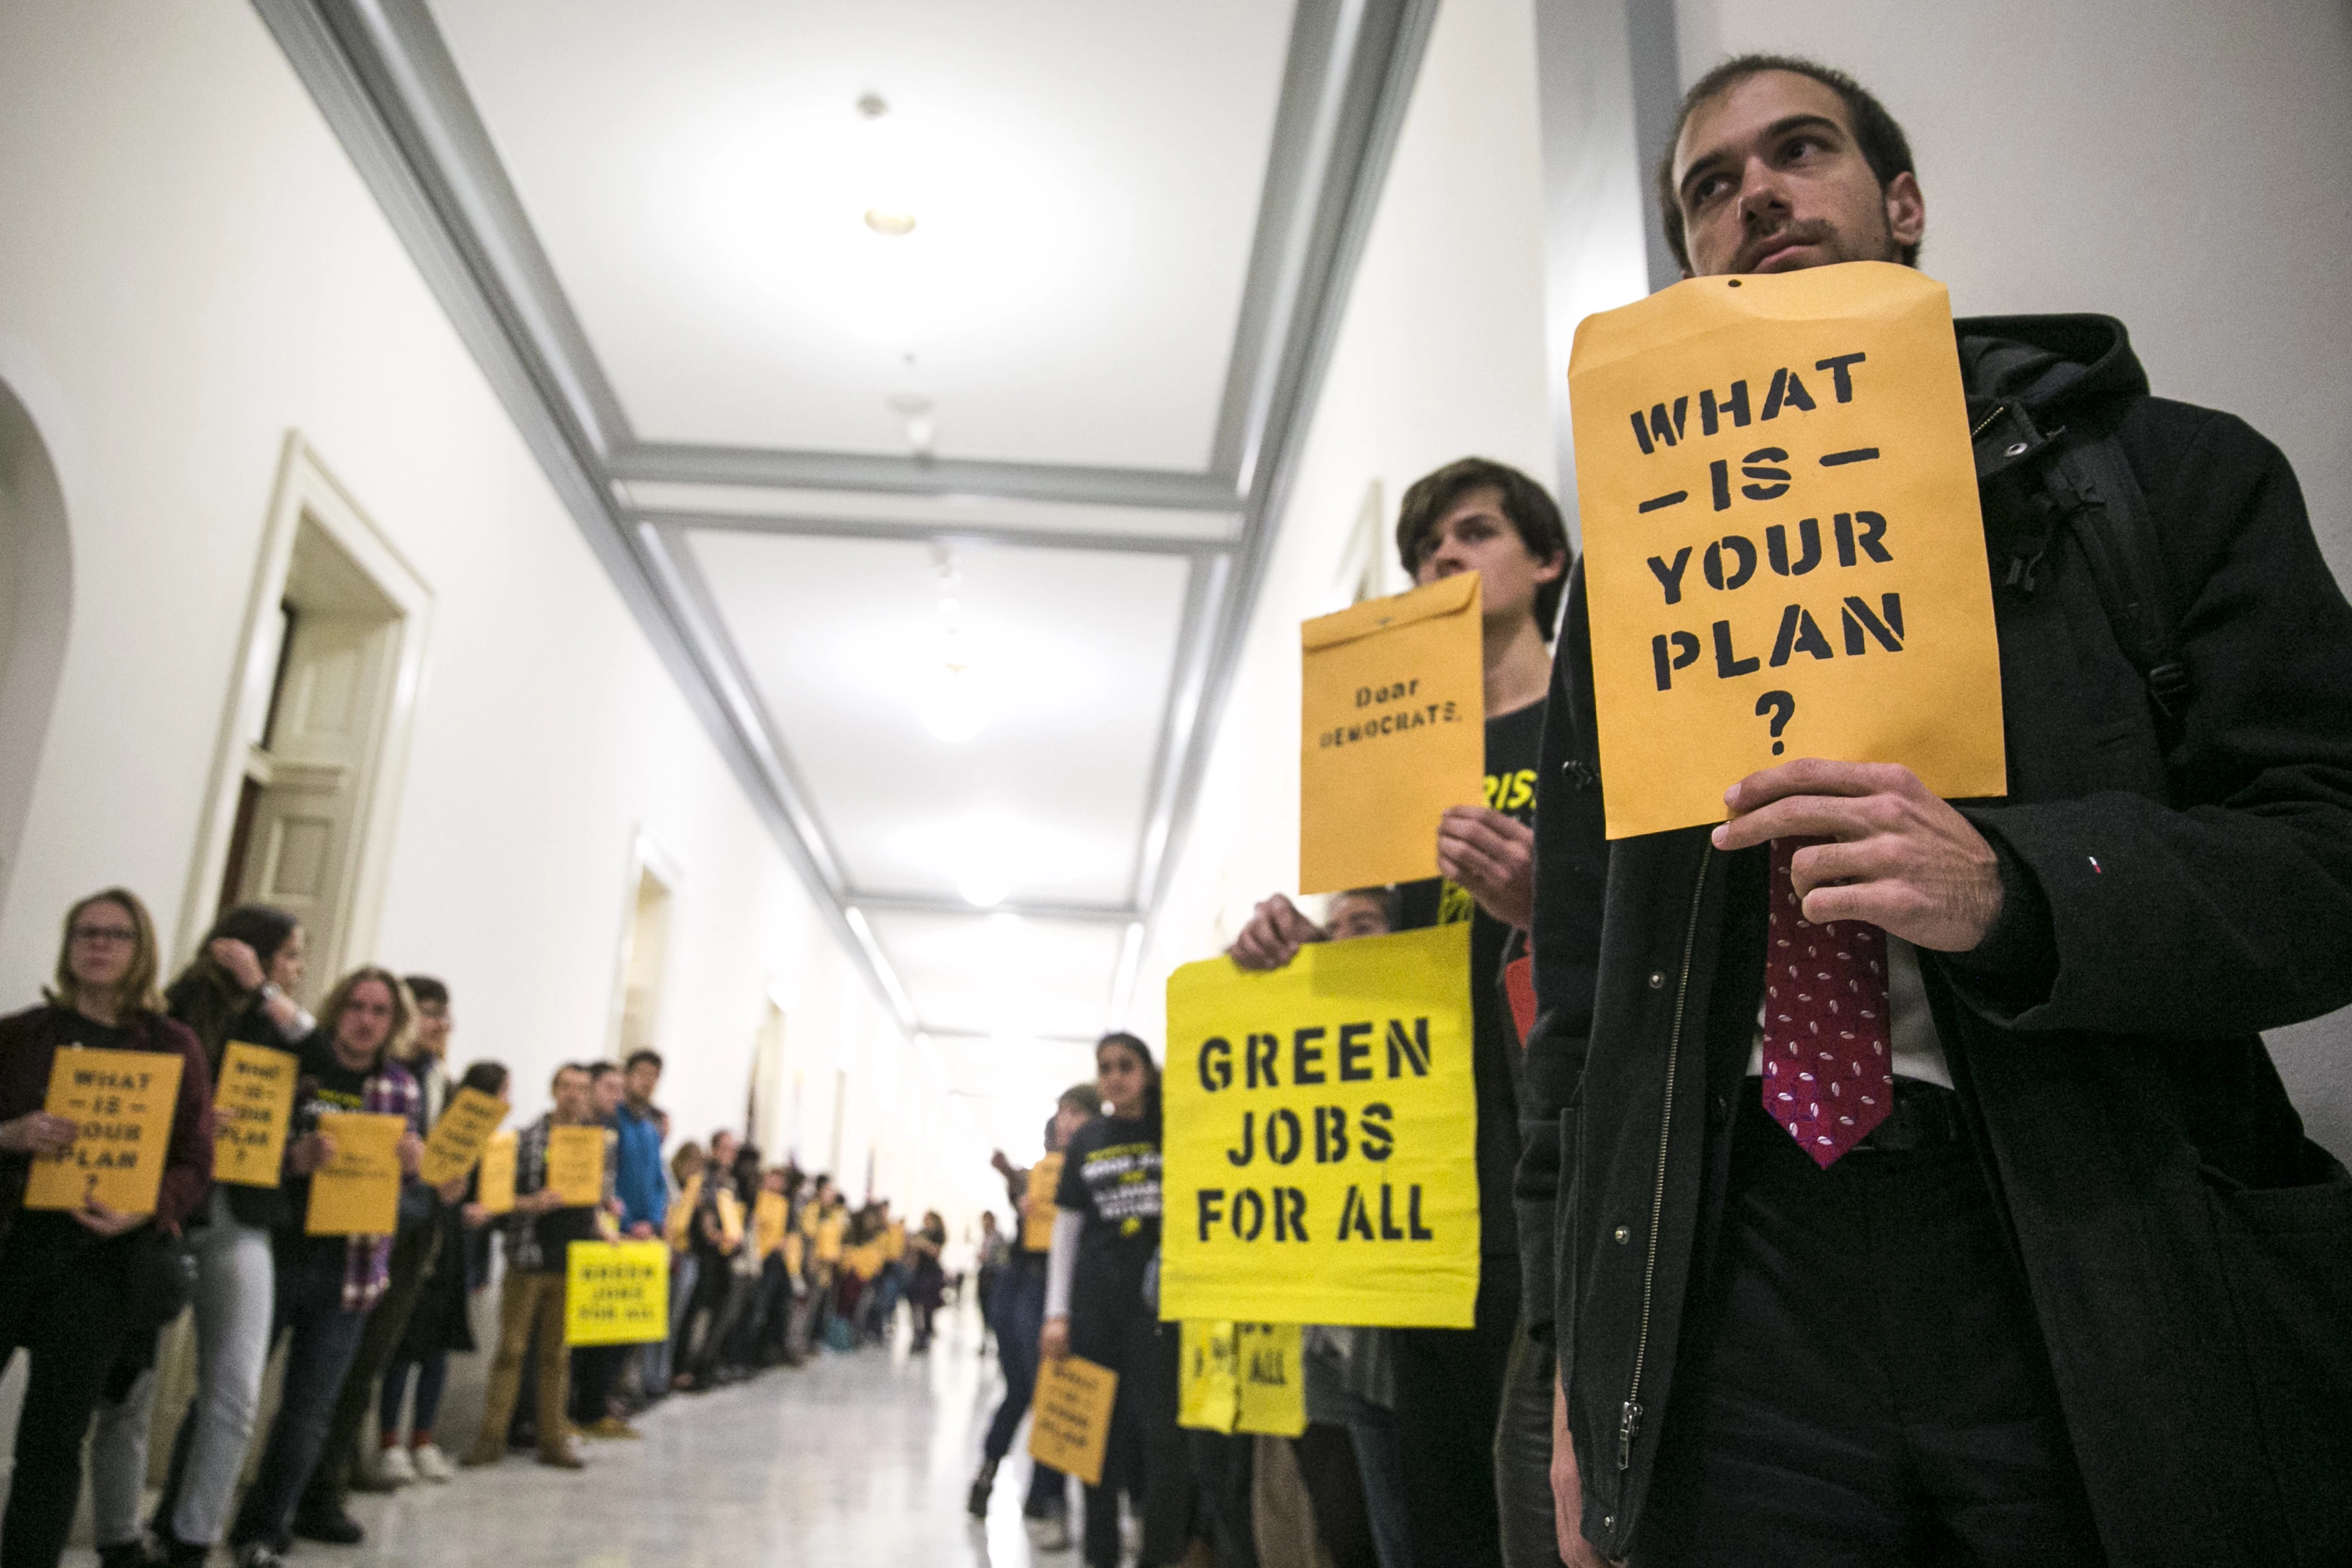 Protesters from the Sunrise Movement gather outside the offices of House Minority Leader Nancy Pelosi (D-Calif.) on Capitol Hill, in Washington, Nov. 13, 2018. Alexandria Ocasio-Cortez, congresswoman-elect from New York, also made a visit to the protest. (Sarah Silbiger/The New York Times)